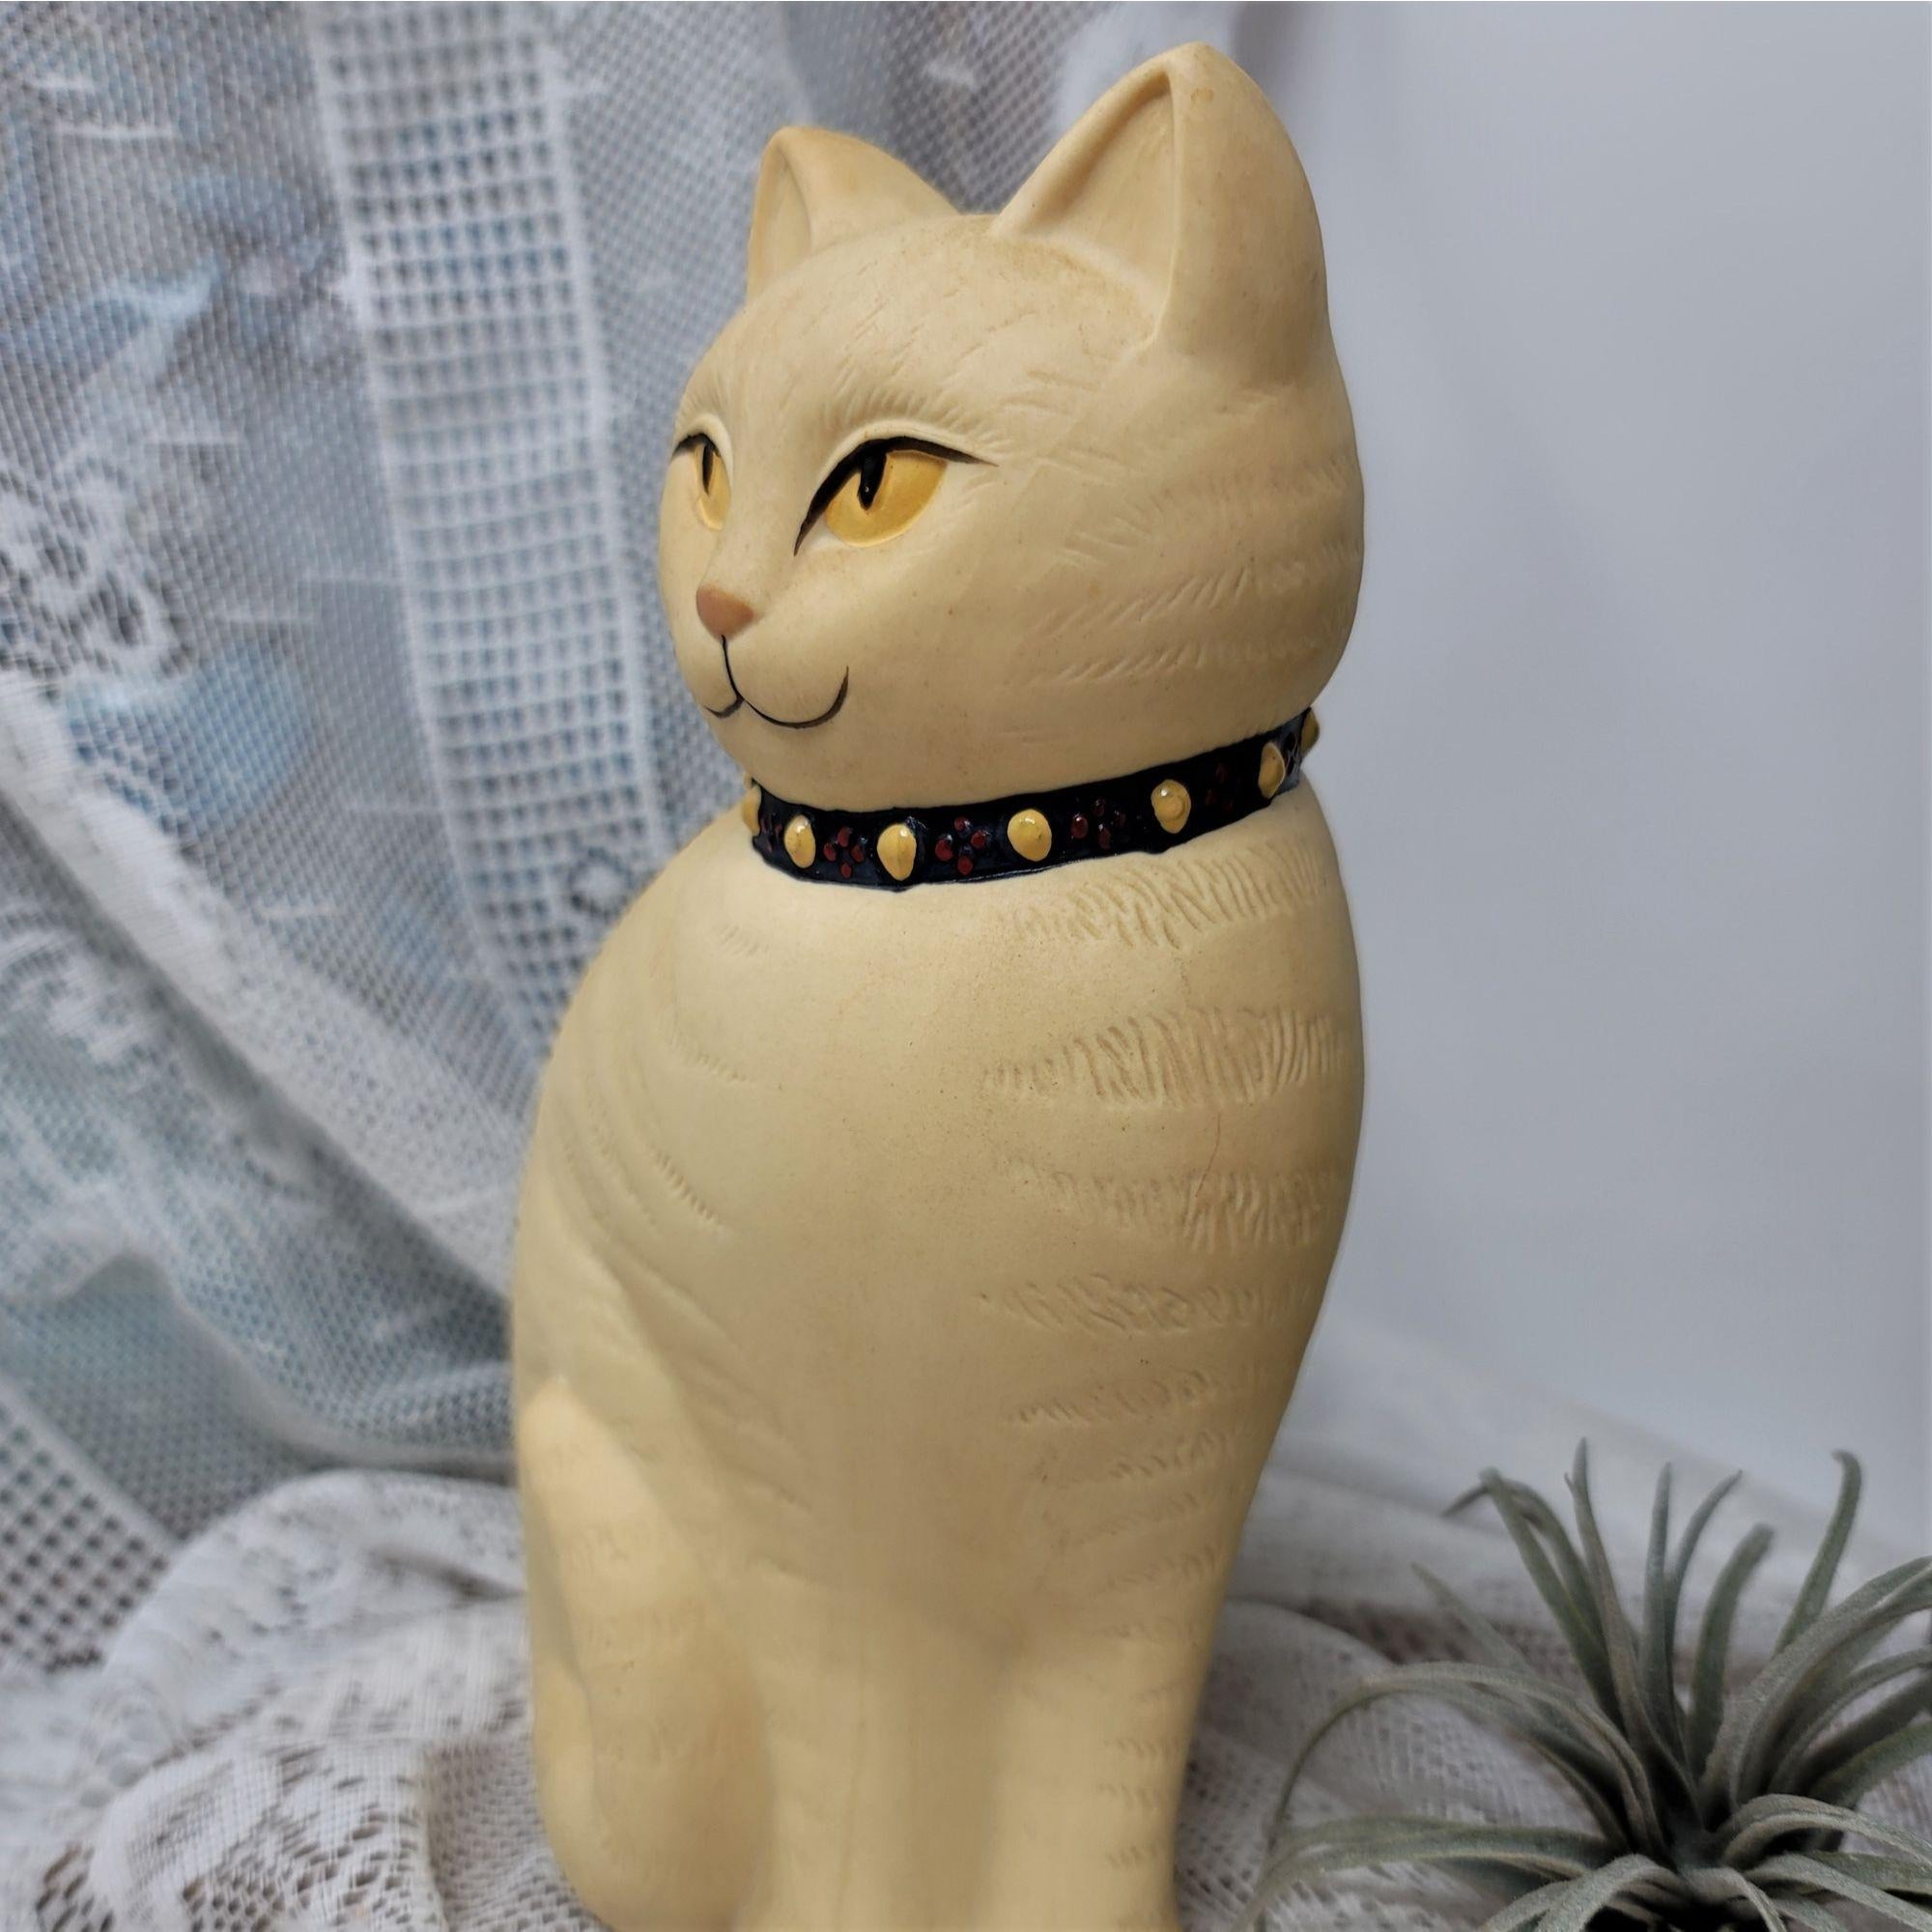 Vintage Kitty Cat Special Gifts By Crowning Touch Ceramic Figurine